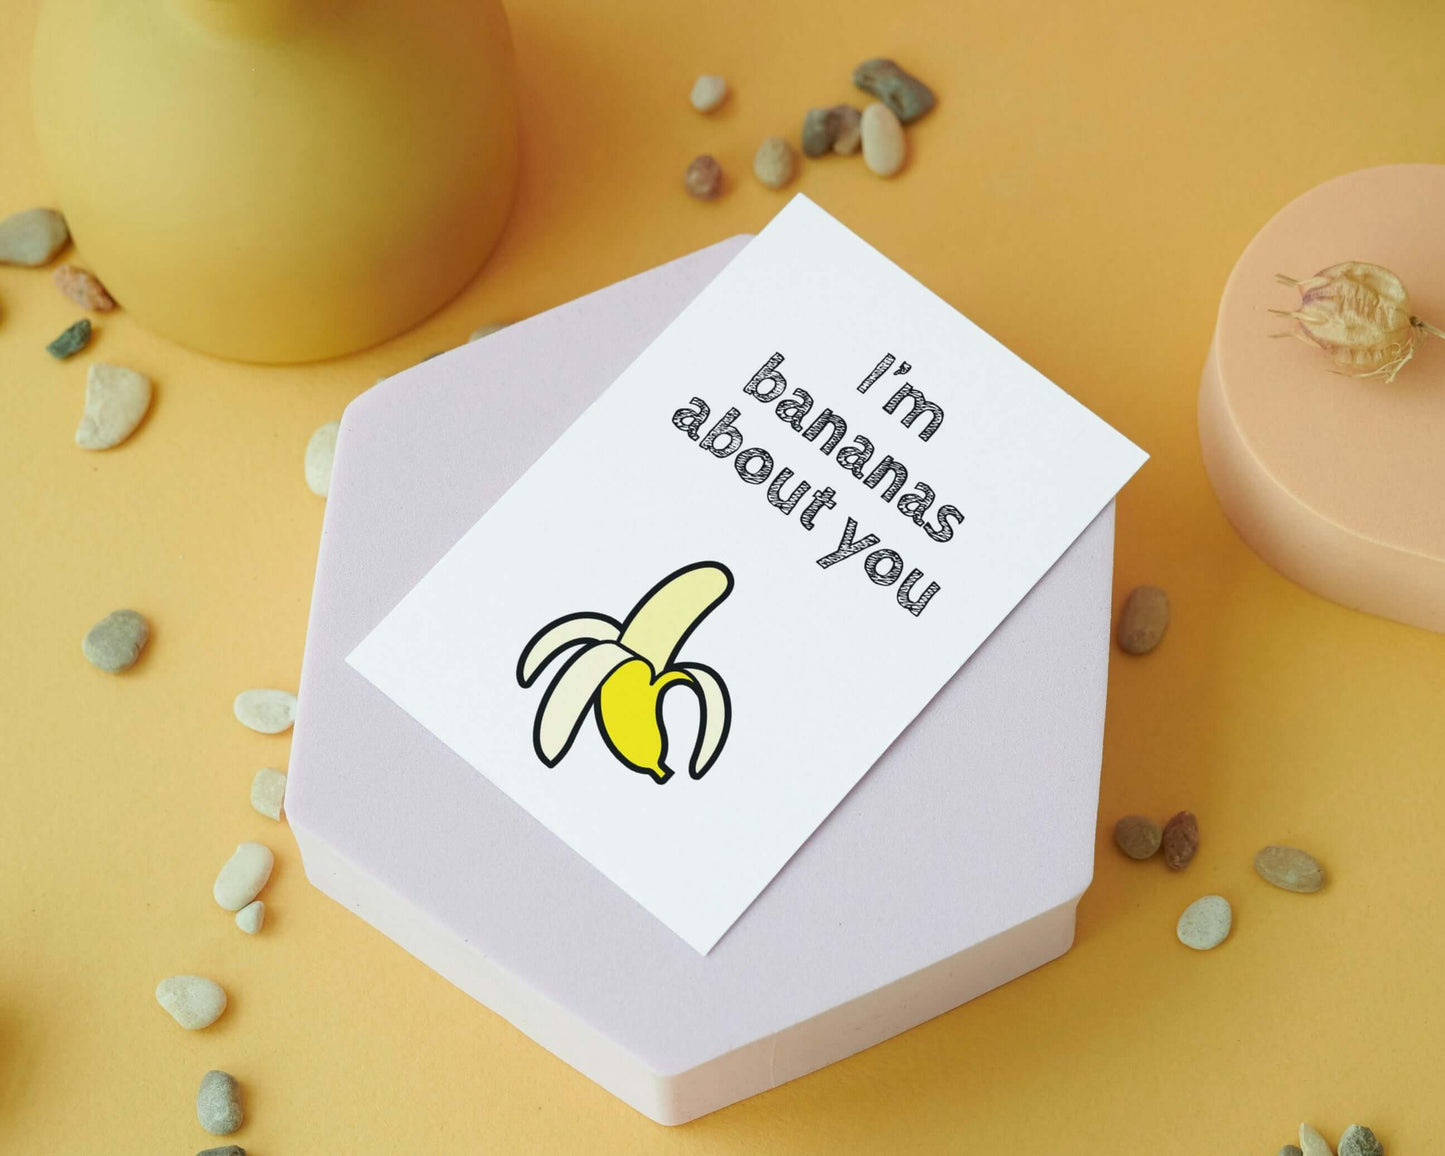 The Card Store UK's I'm Bananas About You | Funny Banana Pun Greeting Card | Everyday General Blank Love Card, Love Cards for £3.50 each